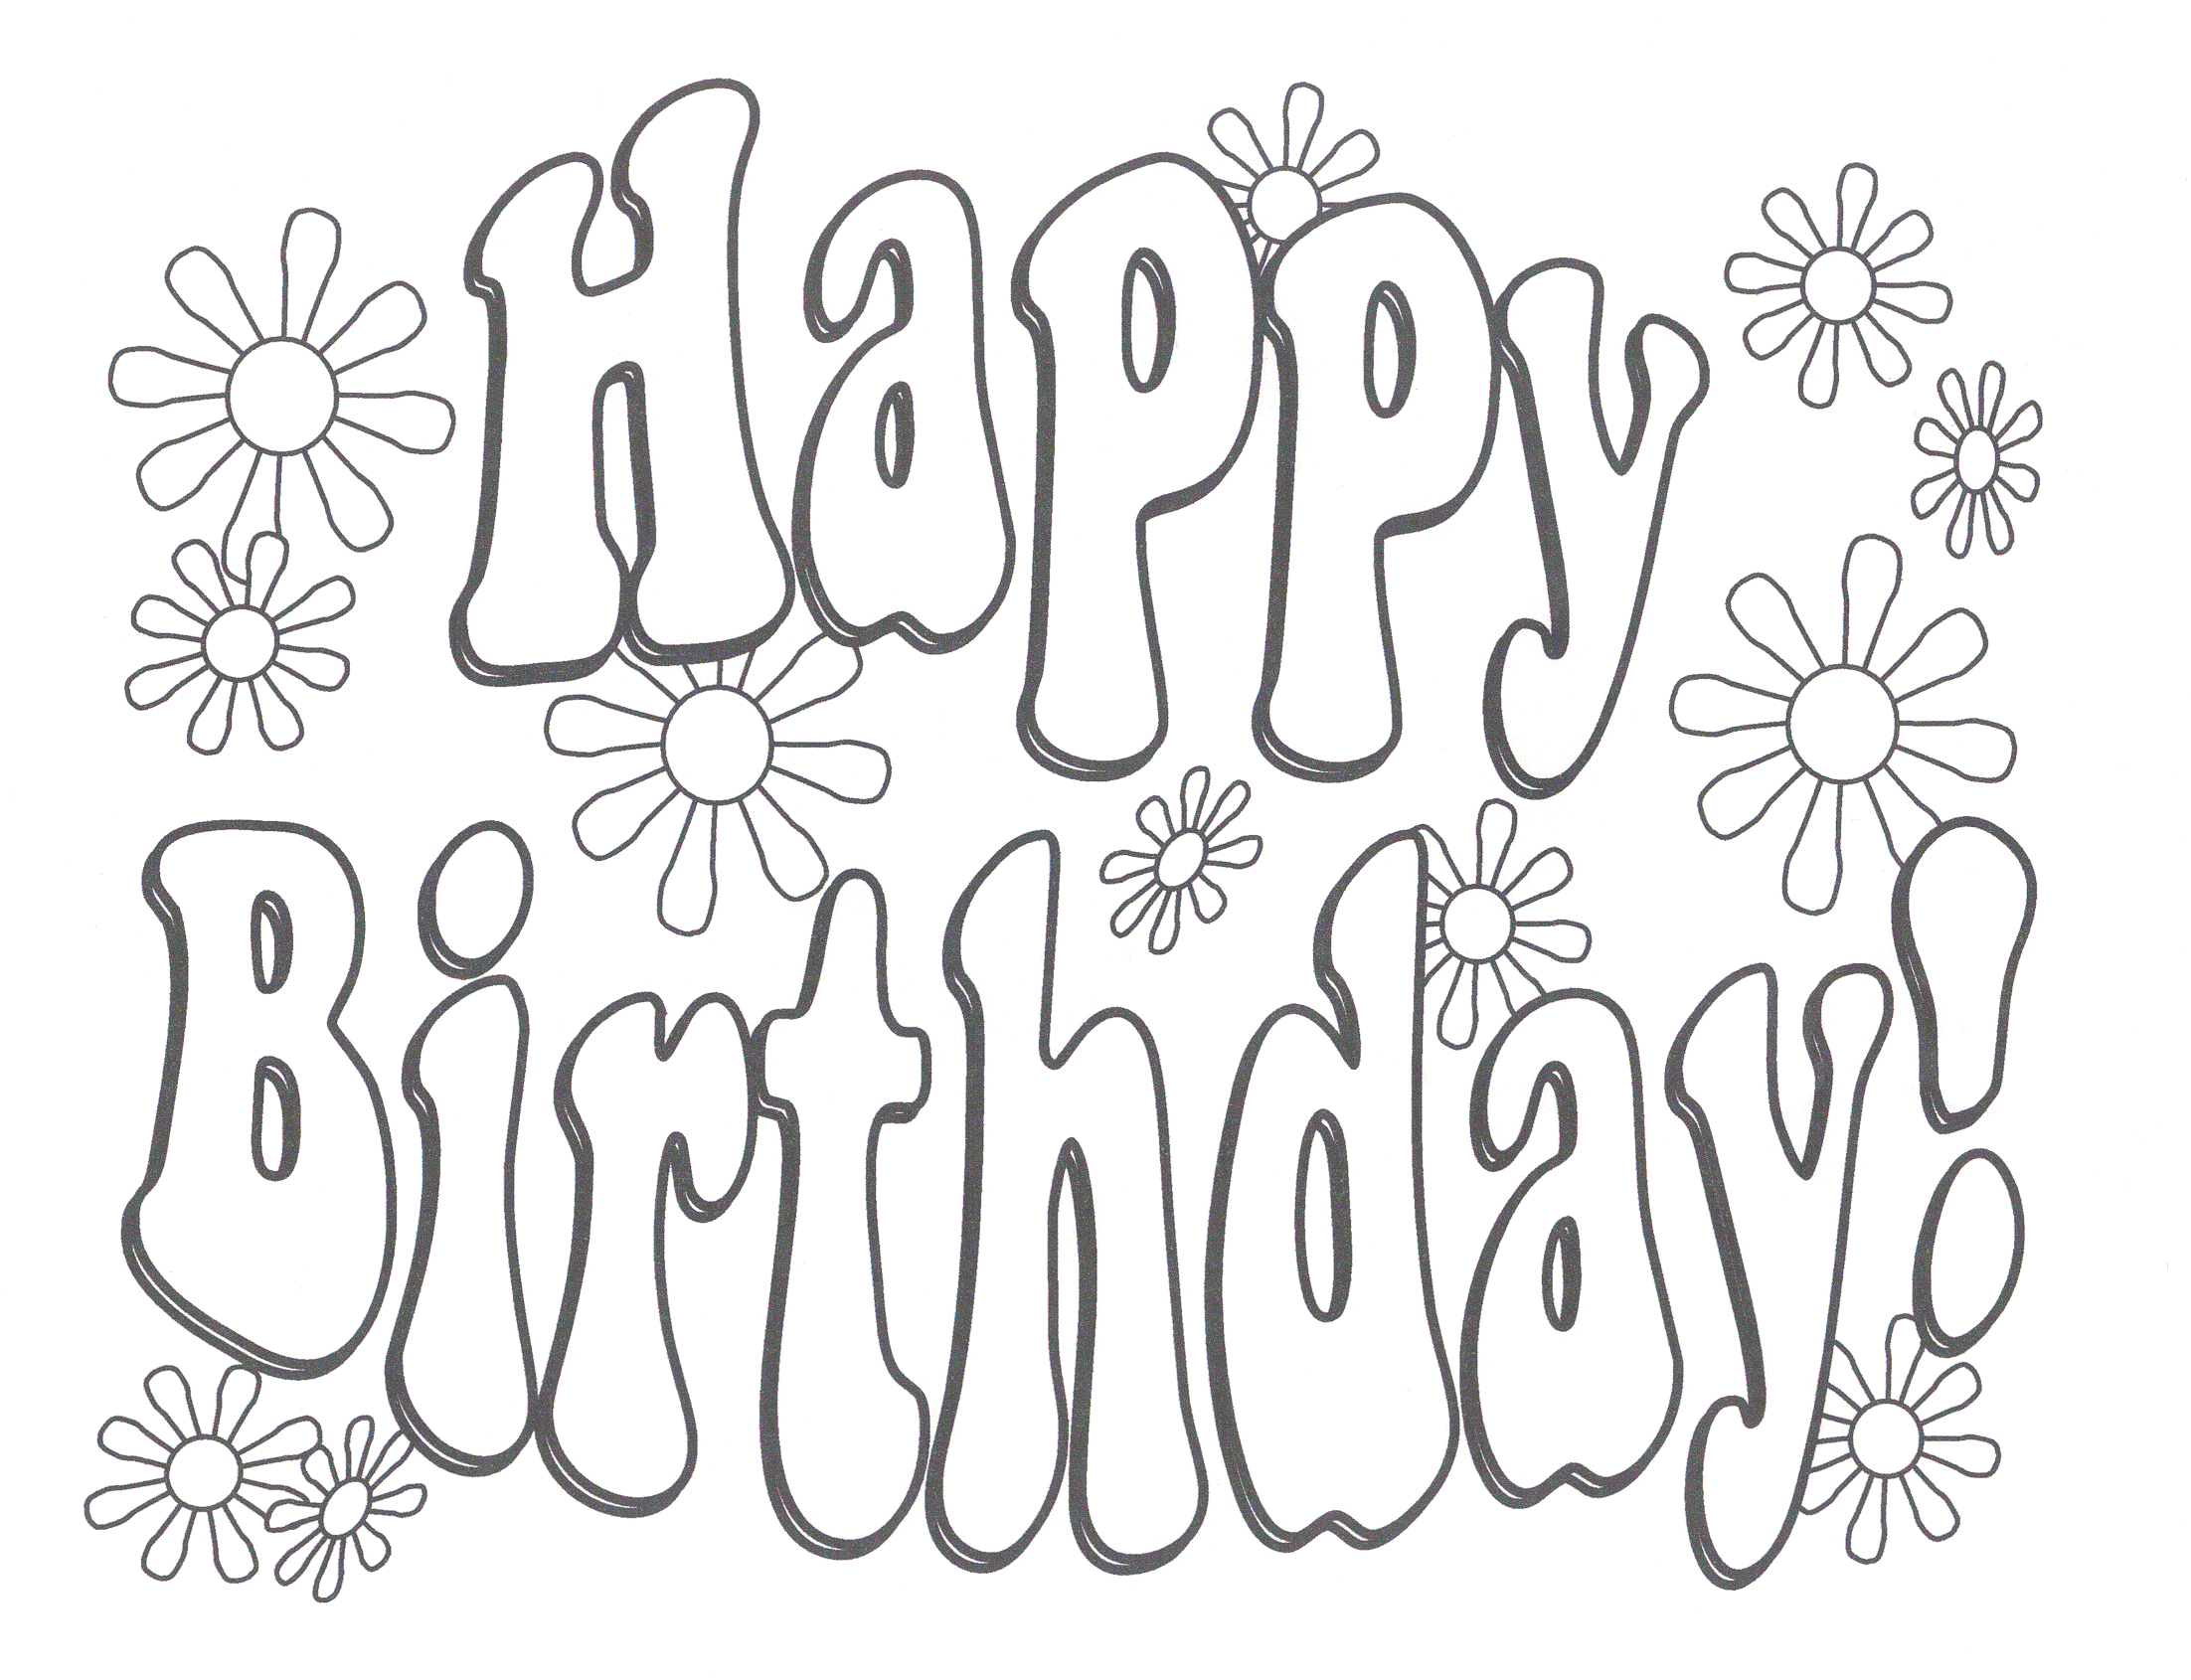 happy birthday coloring pages printable | Only Coloring Pages